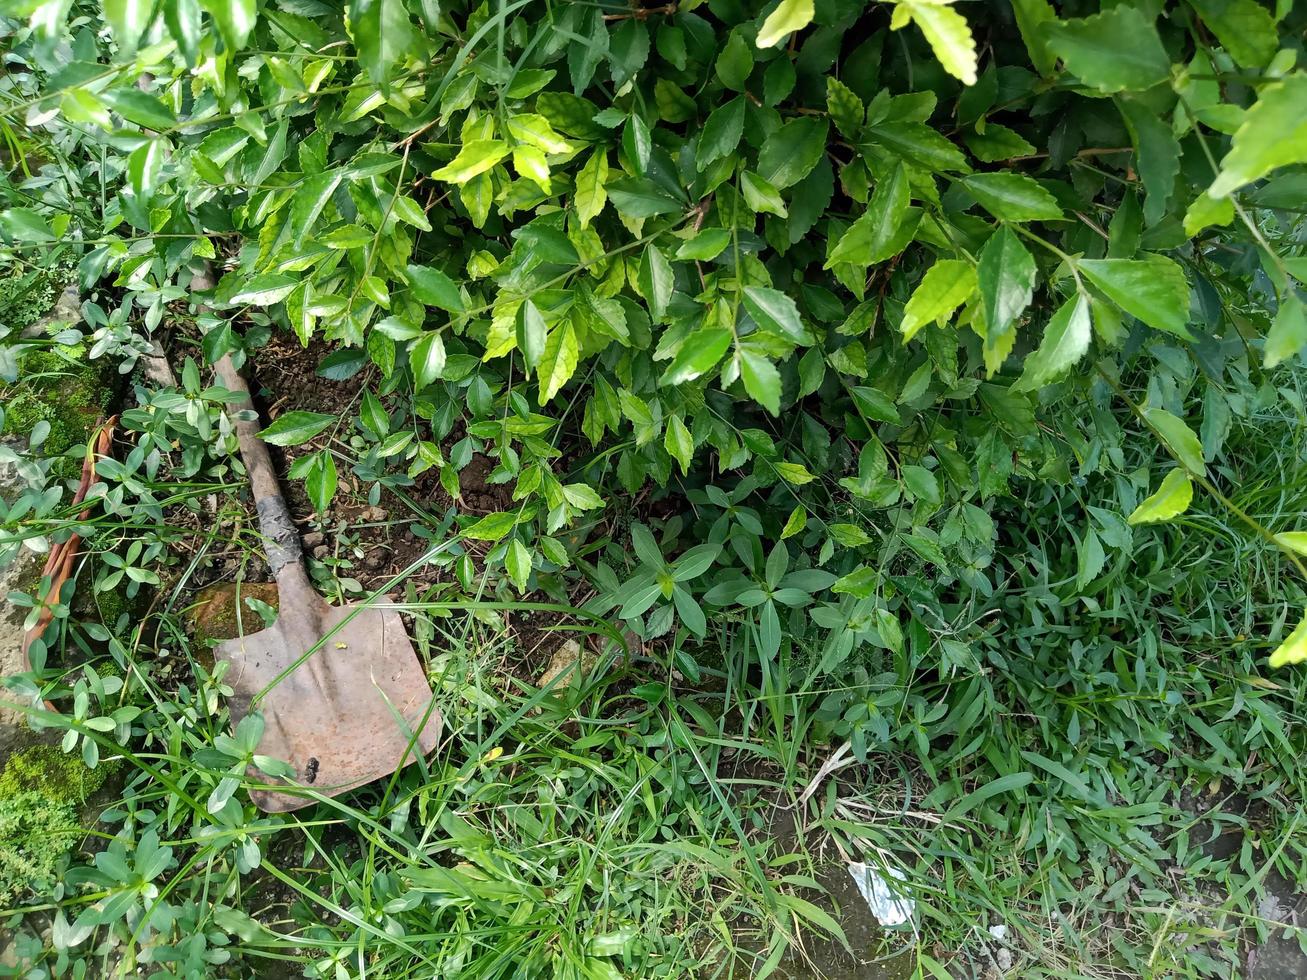 shovel among the green herbs and grass photo